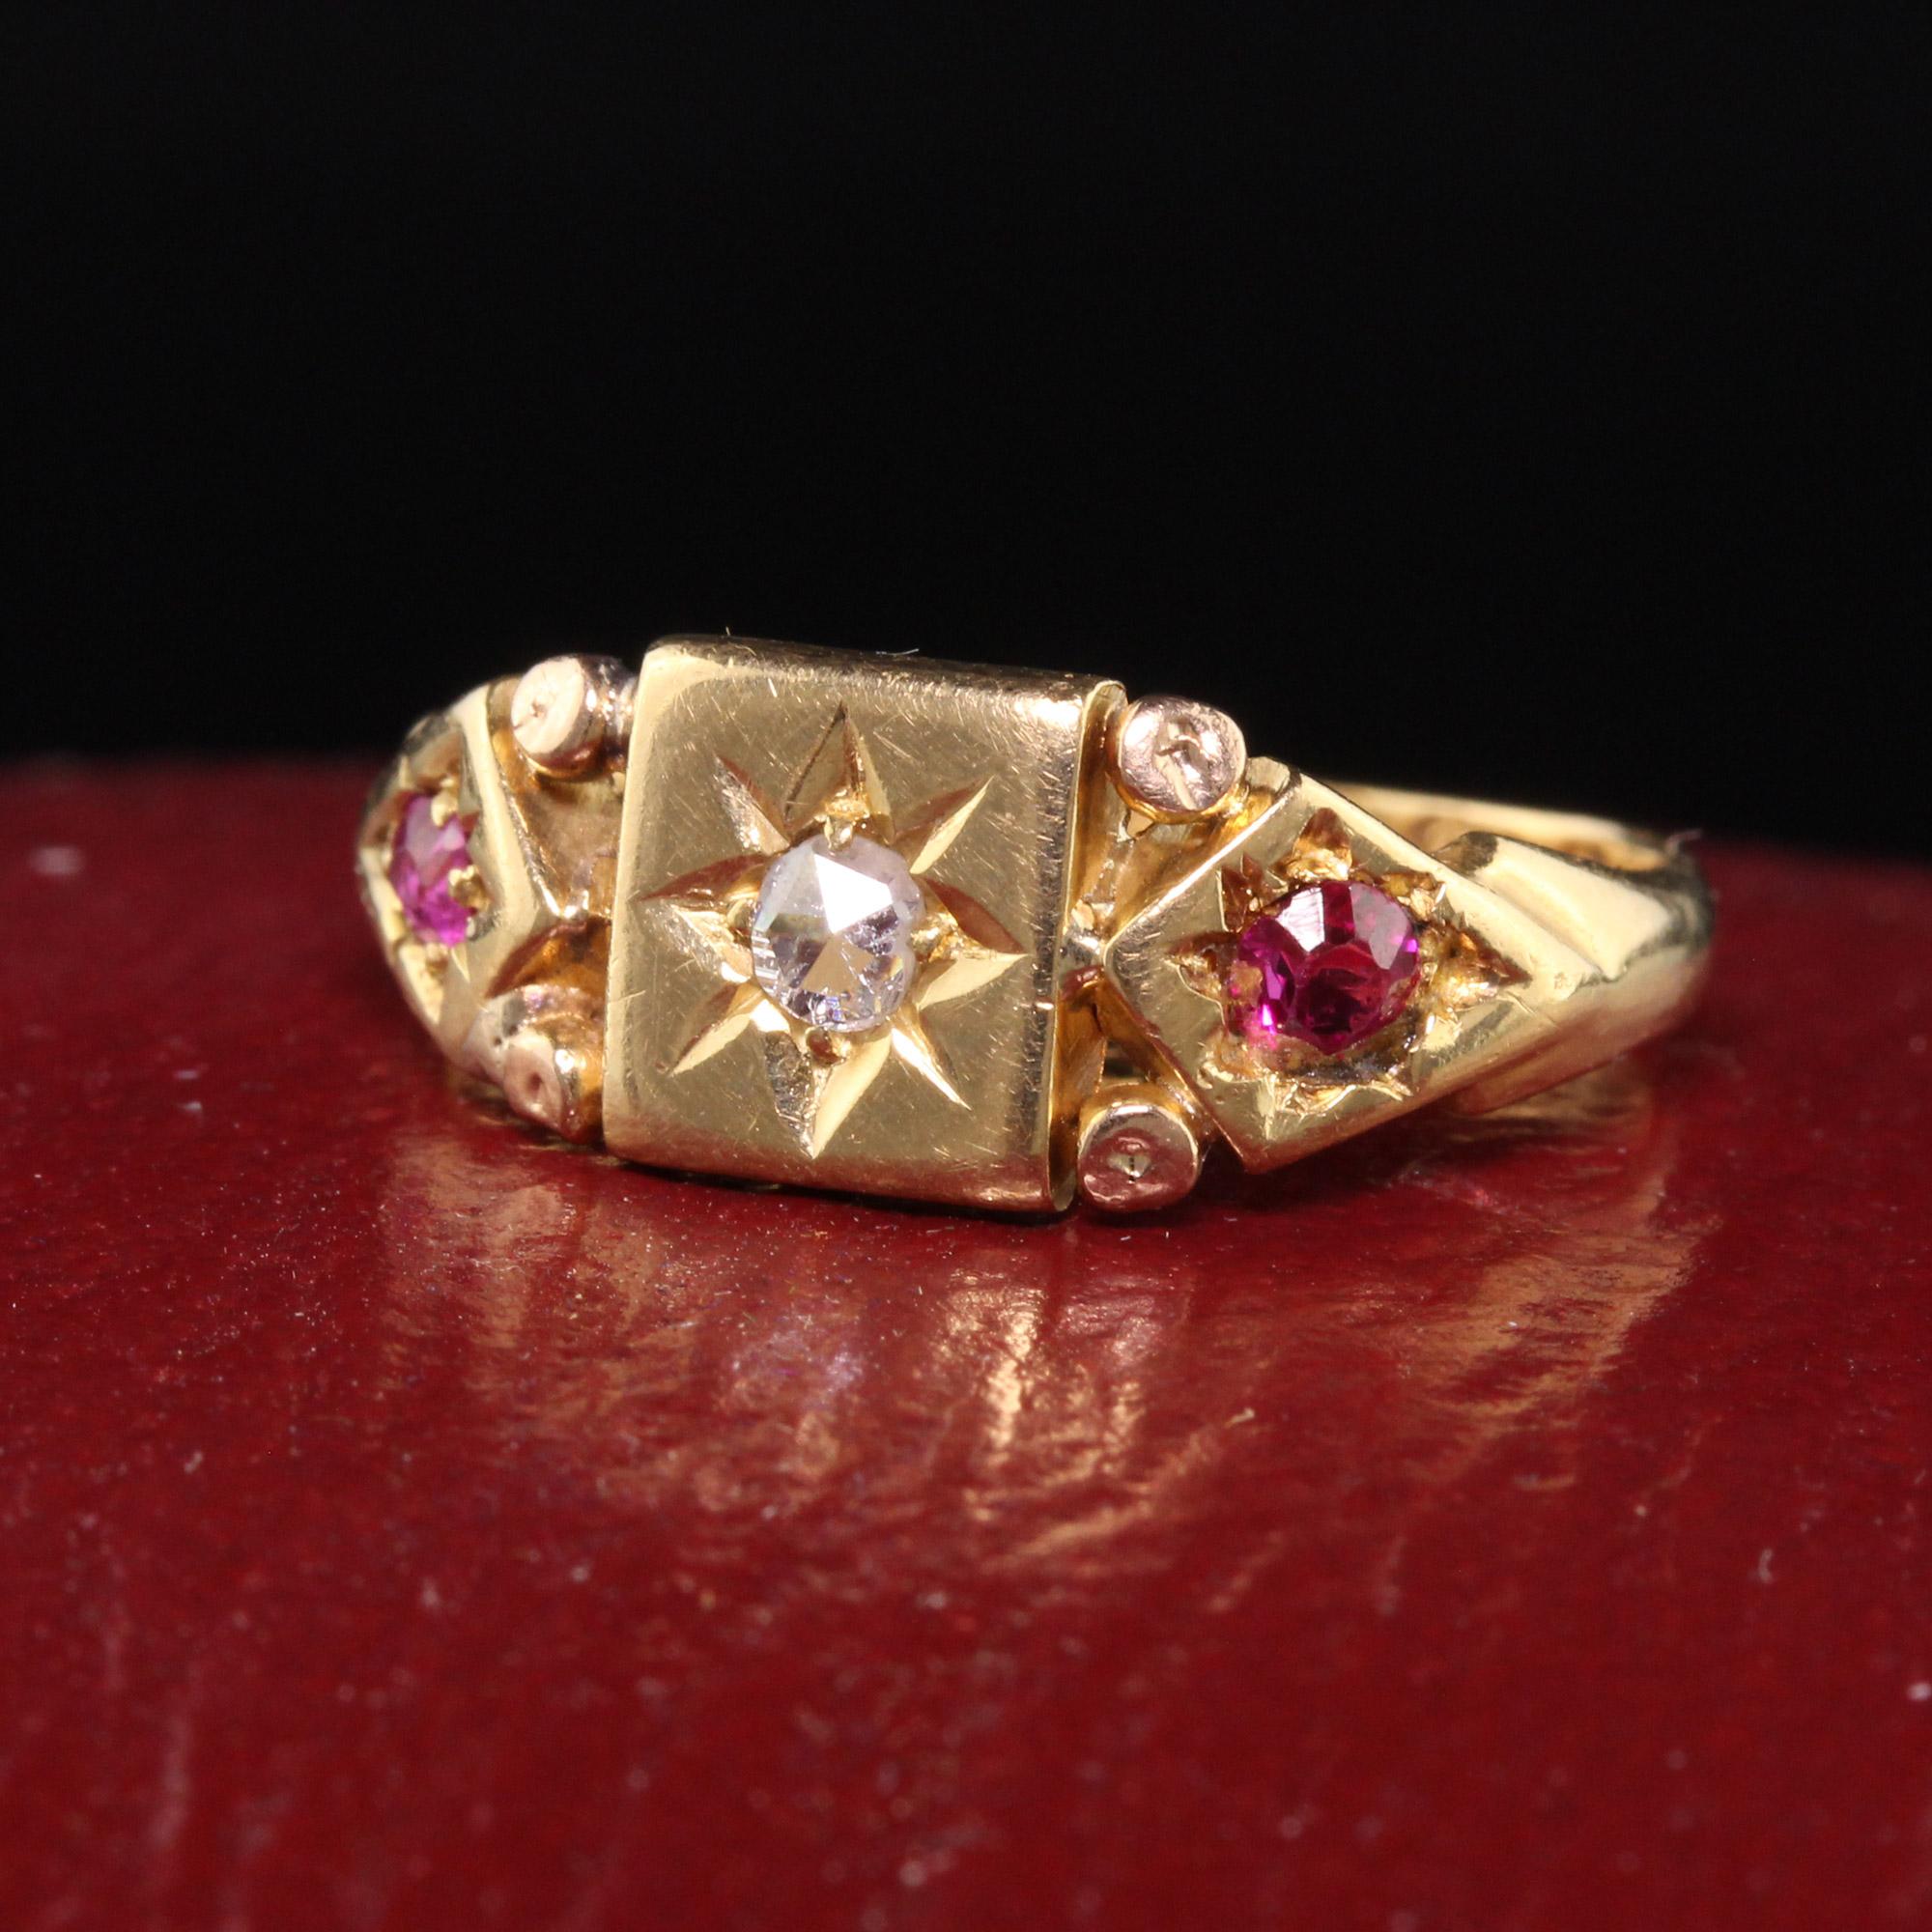 Beautiful Antique Victorian English 18K Yellow Gold Rose Cut Diamond and Ruby Ring. This beautiful Victorian ring is crafted in 18K yellow gold and is made in england. There is a rose cut diamond in the center with 2 natural rubies on the